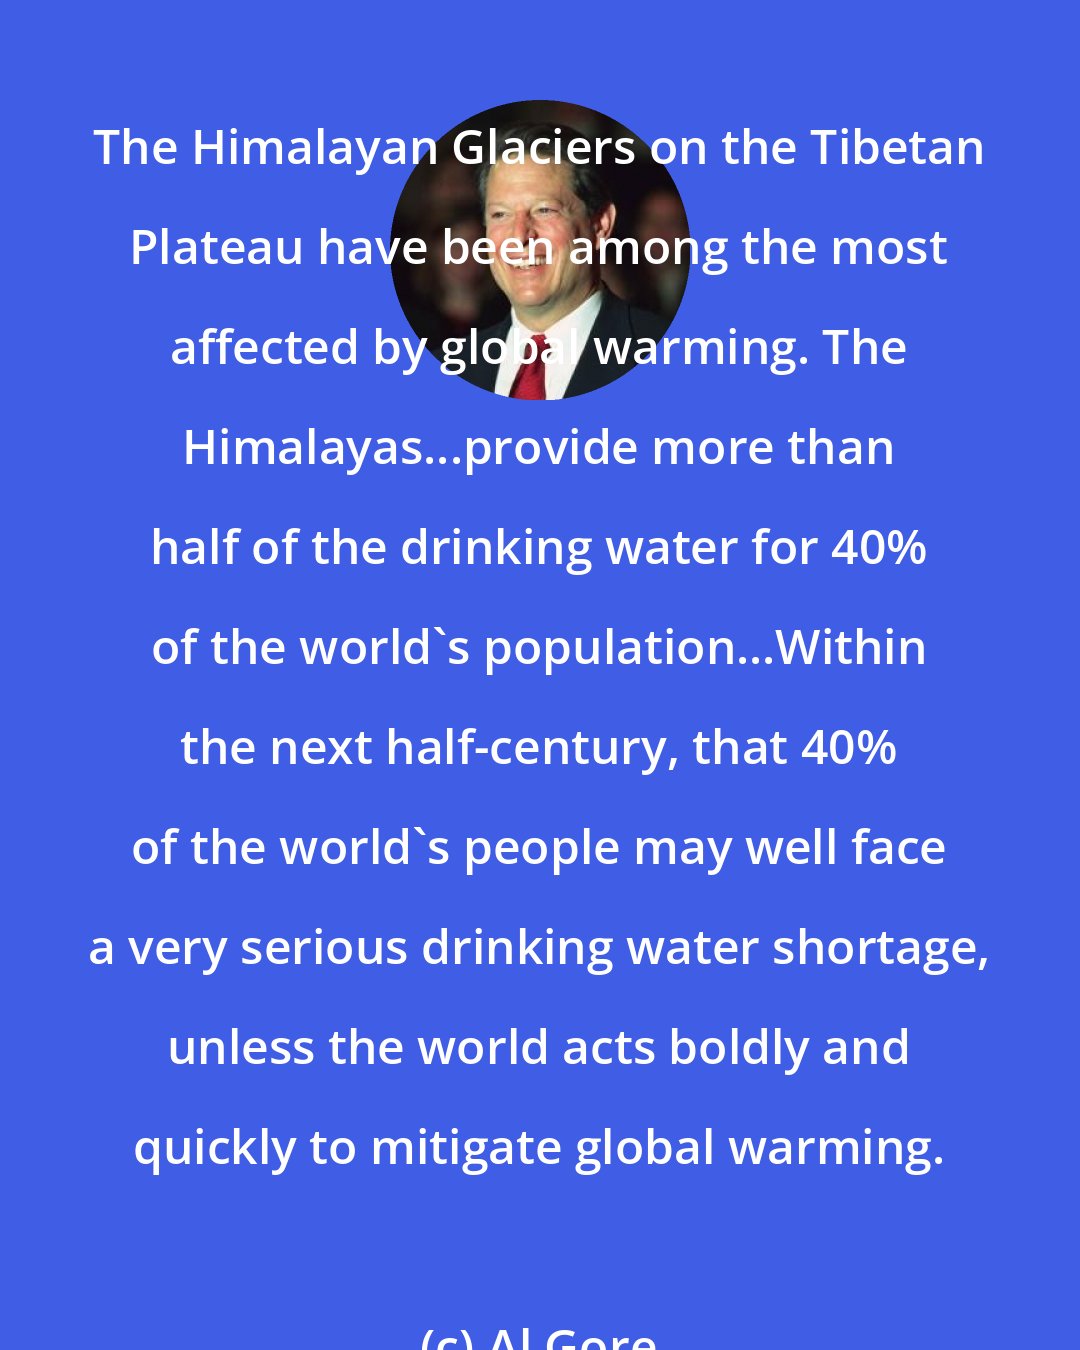 Al Gore: The Himalayan Glaciers on the Tibetan Plateau have been among the most affected by global warming. The Himalayas...provide more than half of the drinking water for 40% of the world's population...Within the next half-century, that 40% of the world's people may well face a very serious drinking water shortage, unless the world acts boldly and quickly to mitigate global warming.